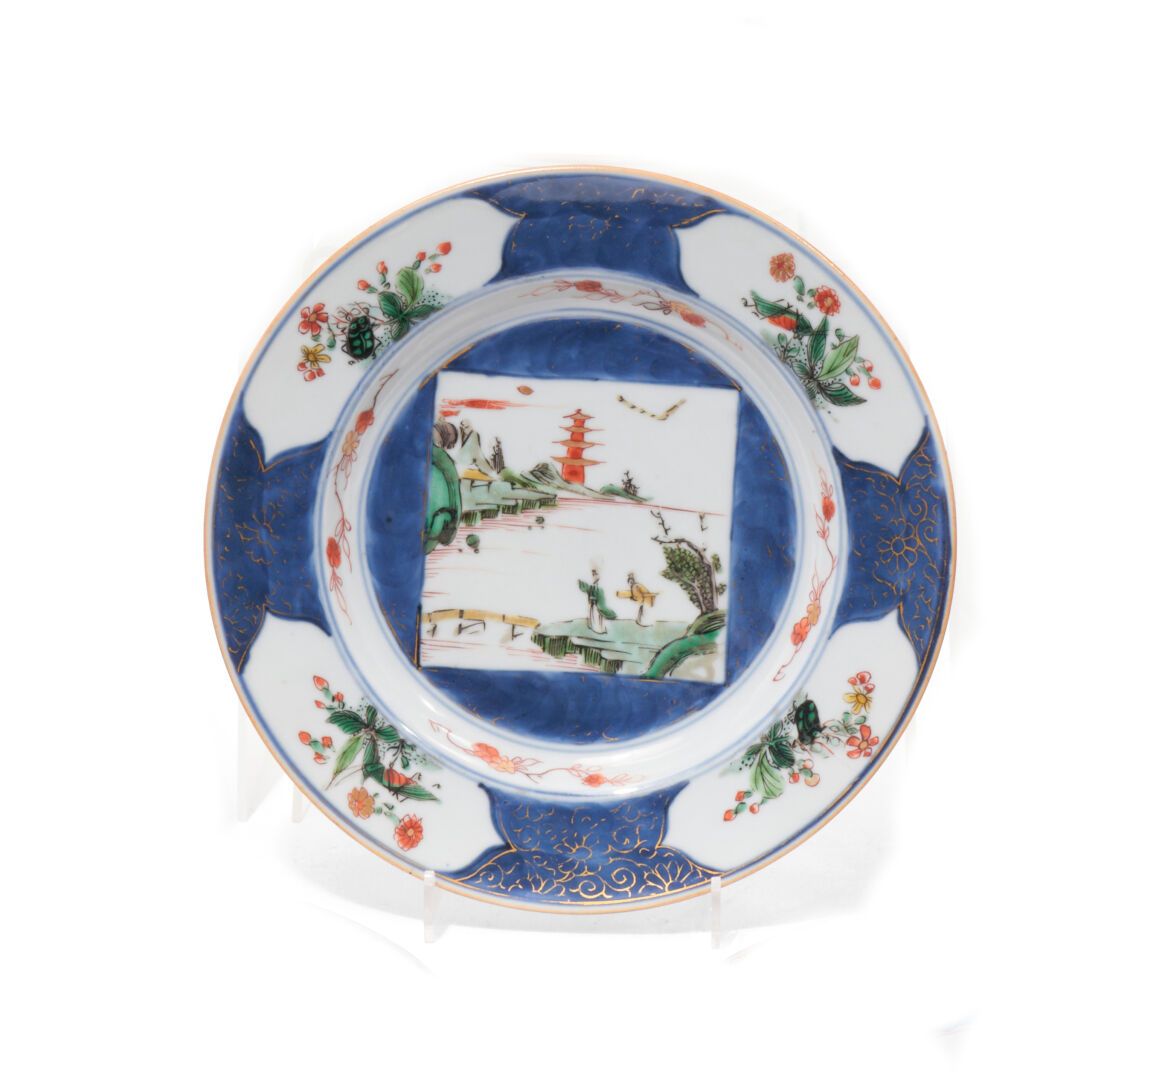 Null China
Porcelain plate with polychrome decoration in green family enamels of&hellip;